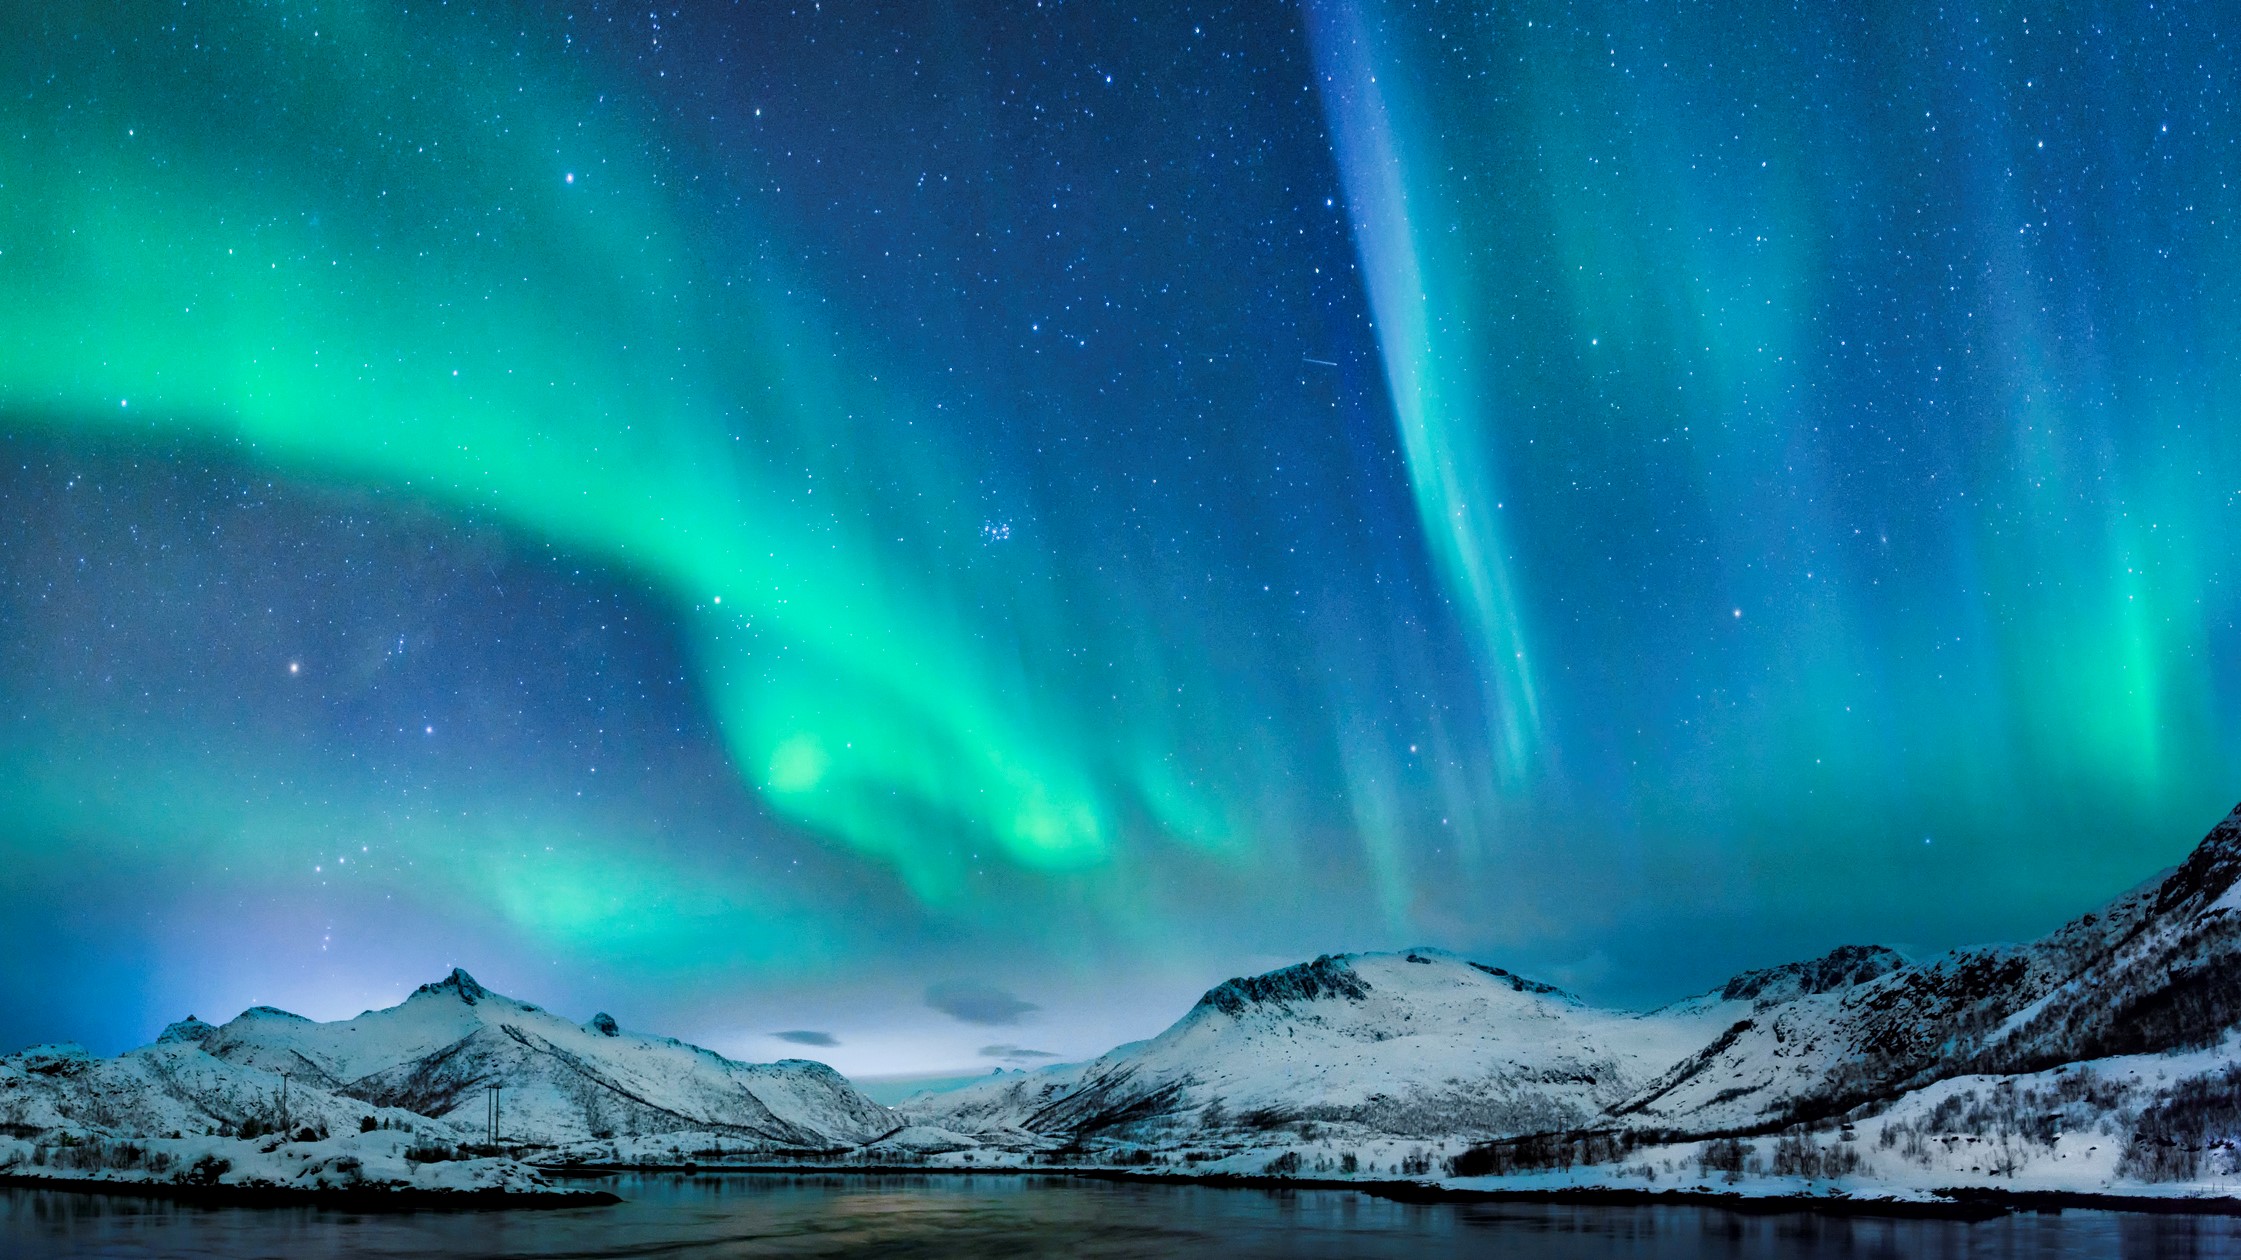 Aurora borealis, ribbons of green and blue streak across the sky above snow-capped hills.